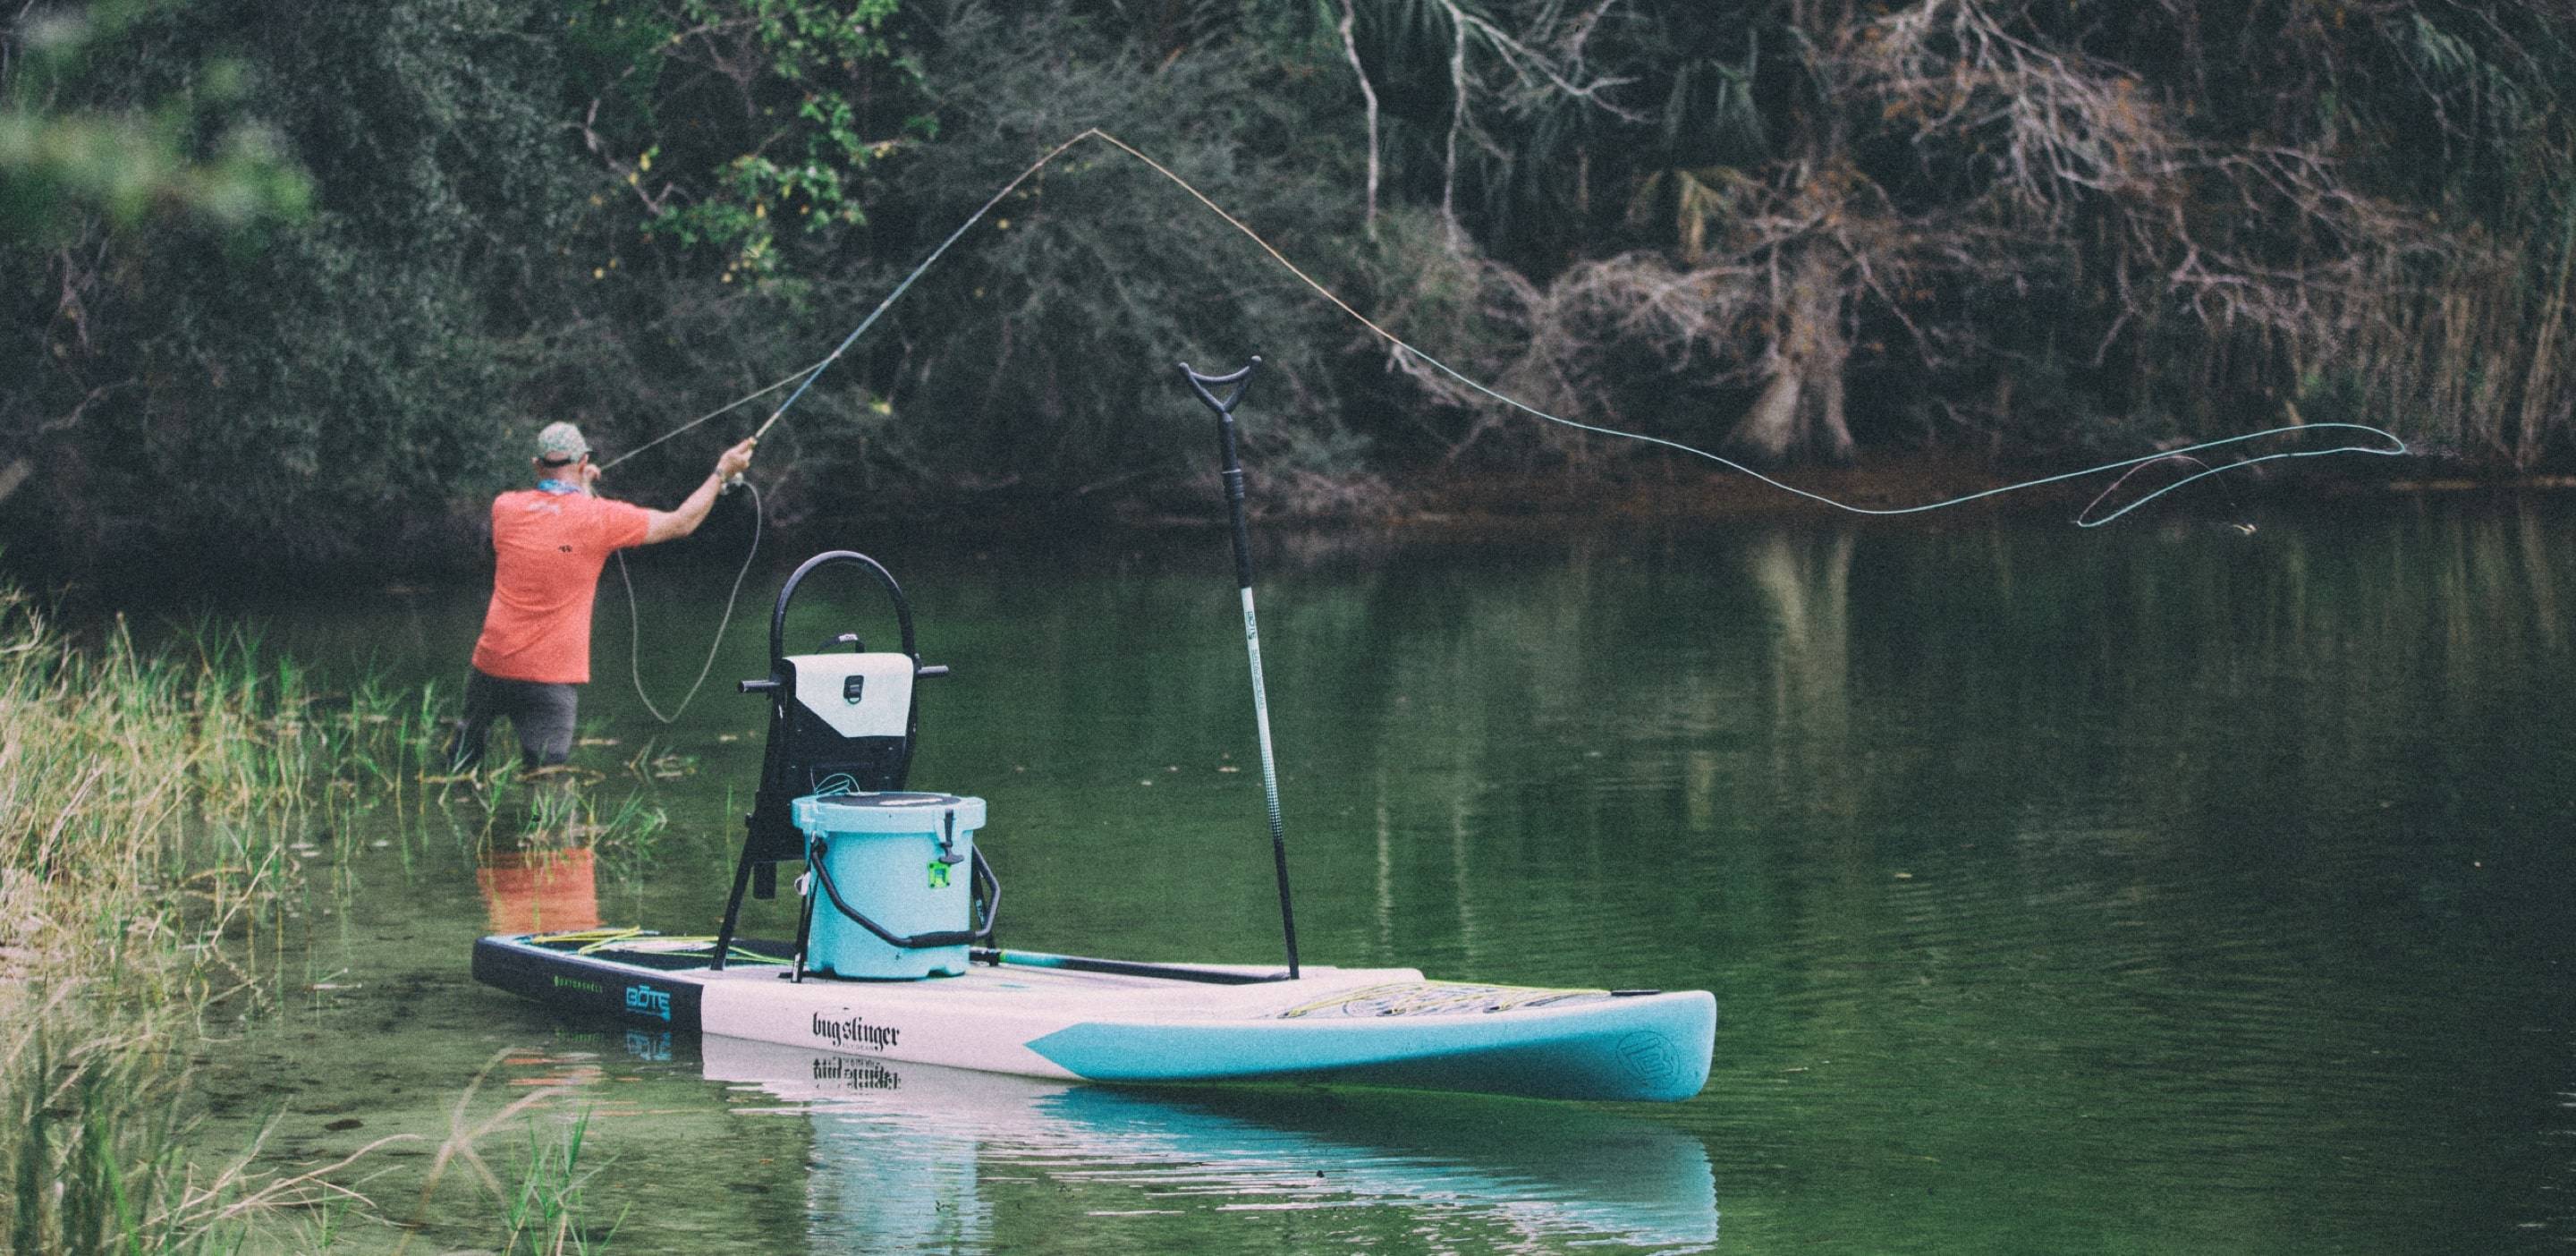 Man fly fishing on the Bug Slinger Silver King paddle board